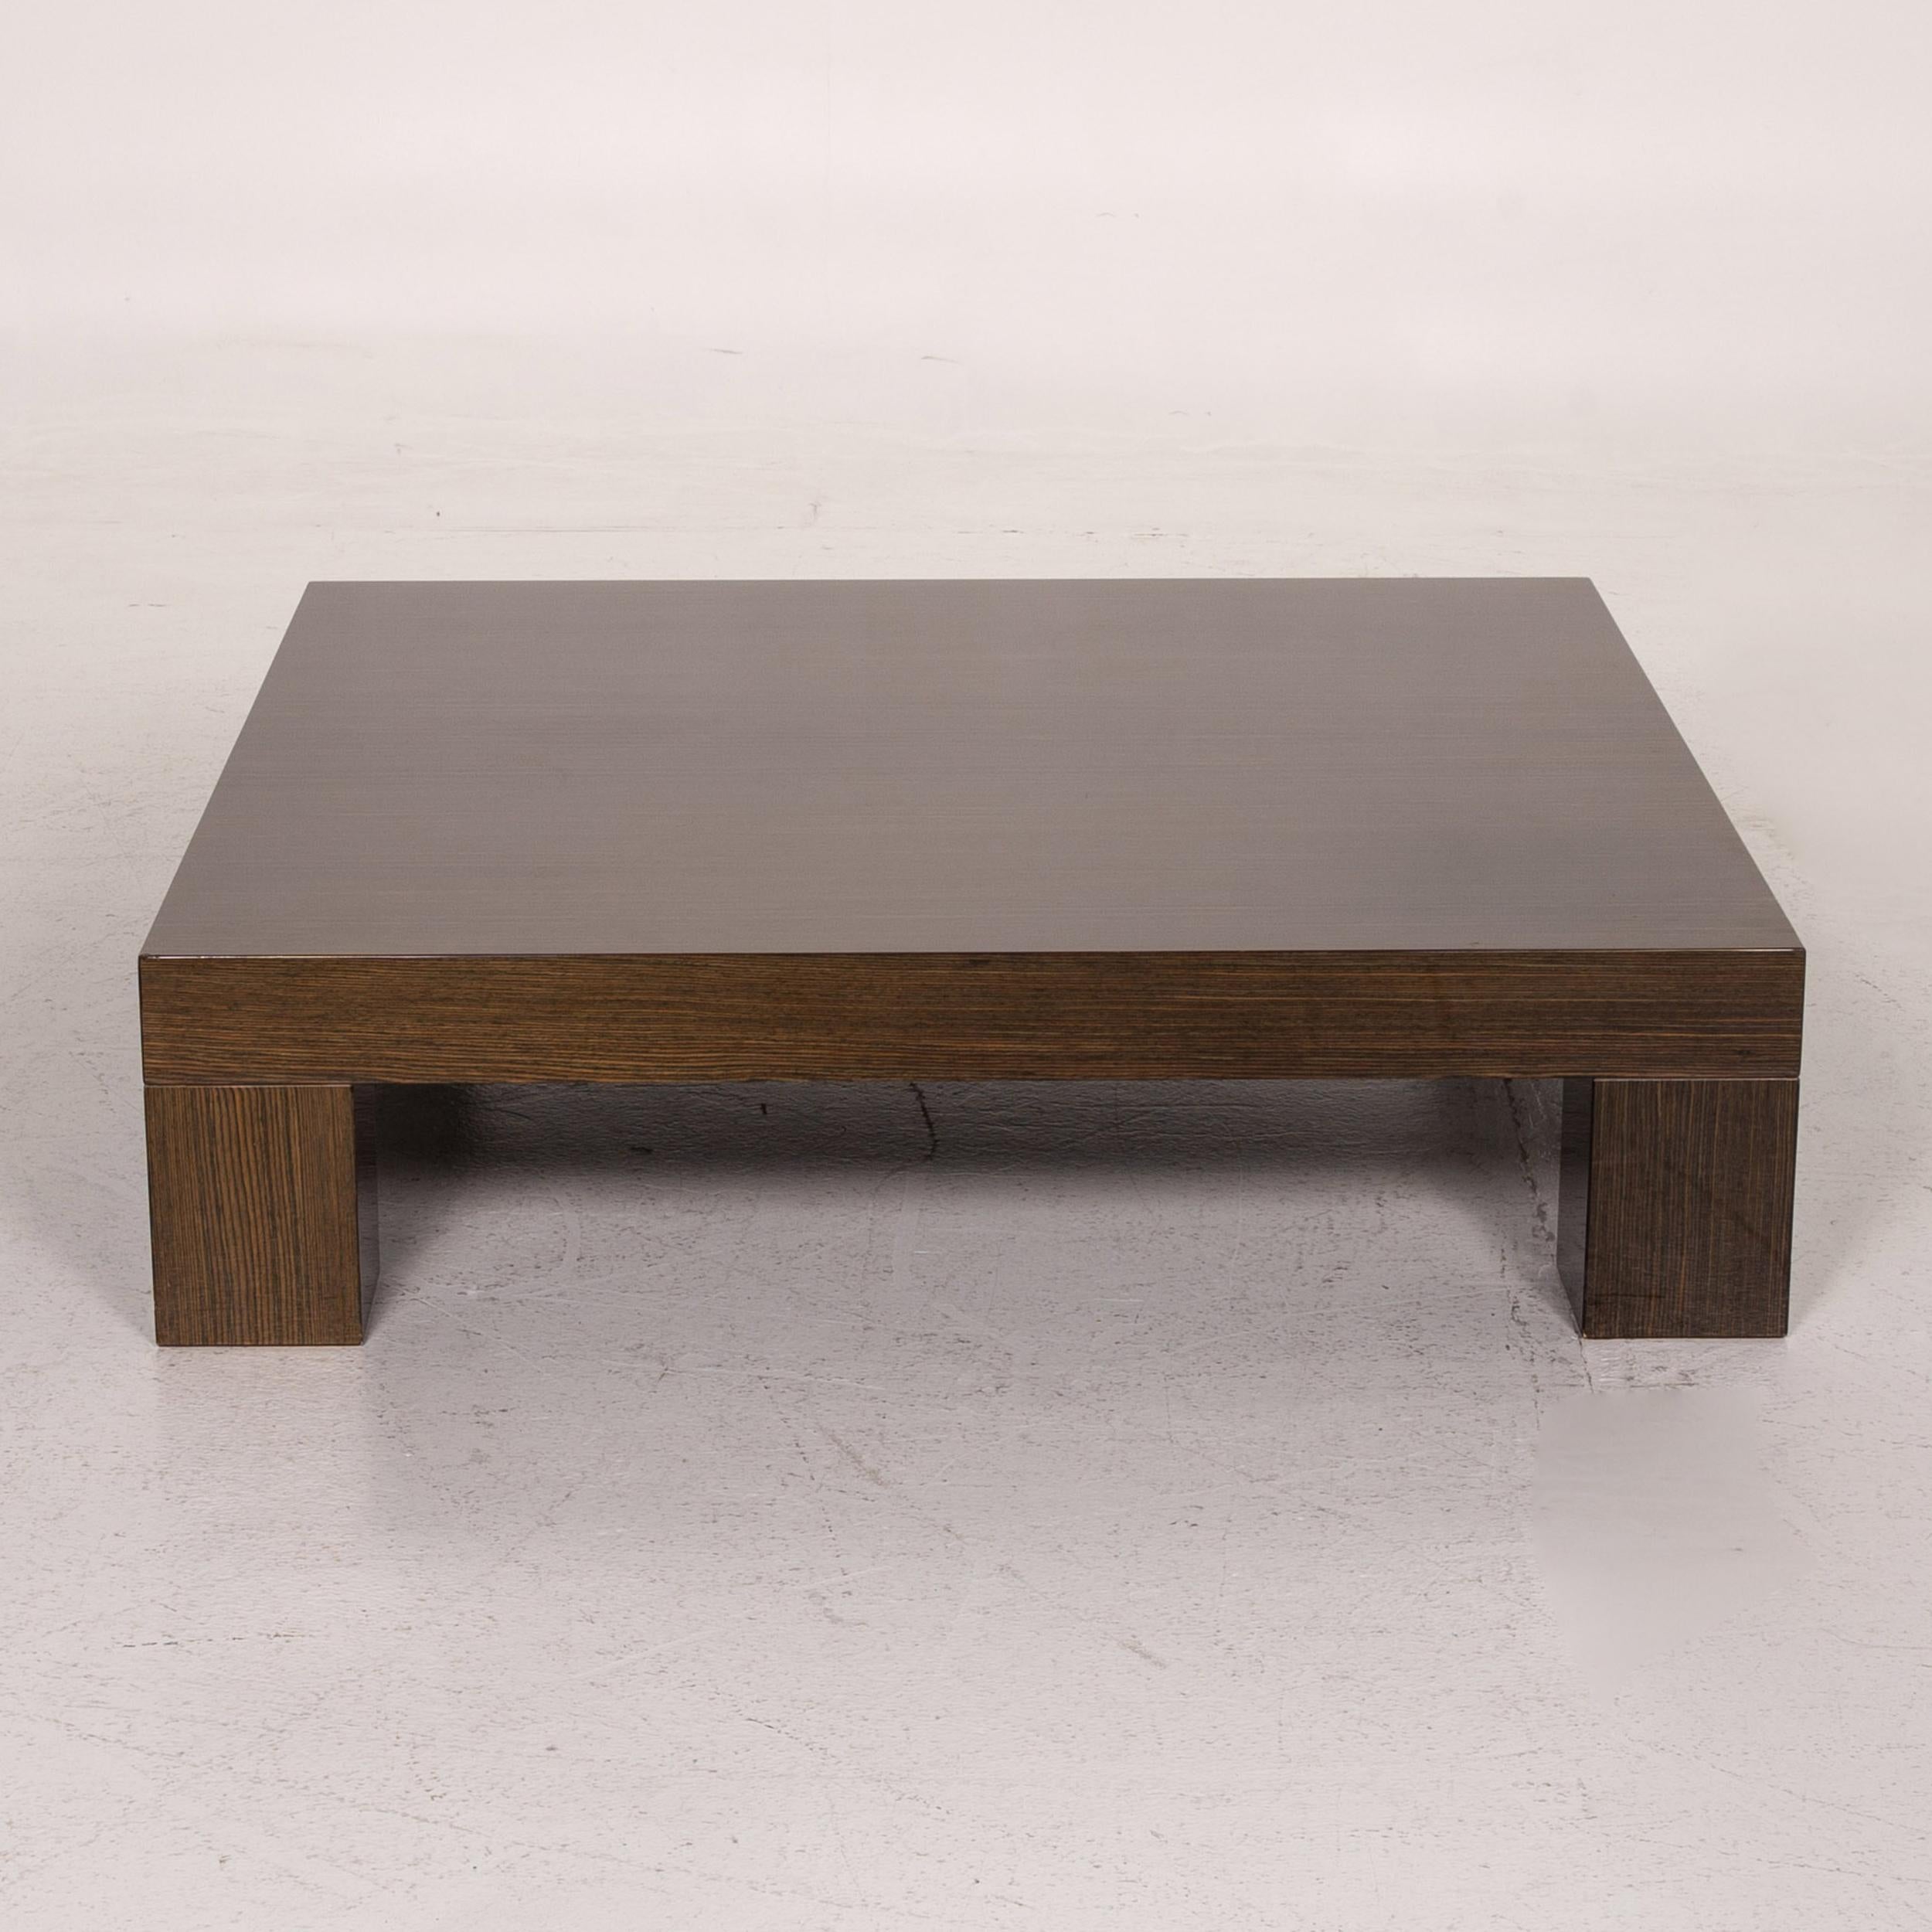 Minotti Wooden Coffee Table Brown High Gloss Table In Good Condition For Sale In Cologne, DE